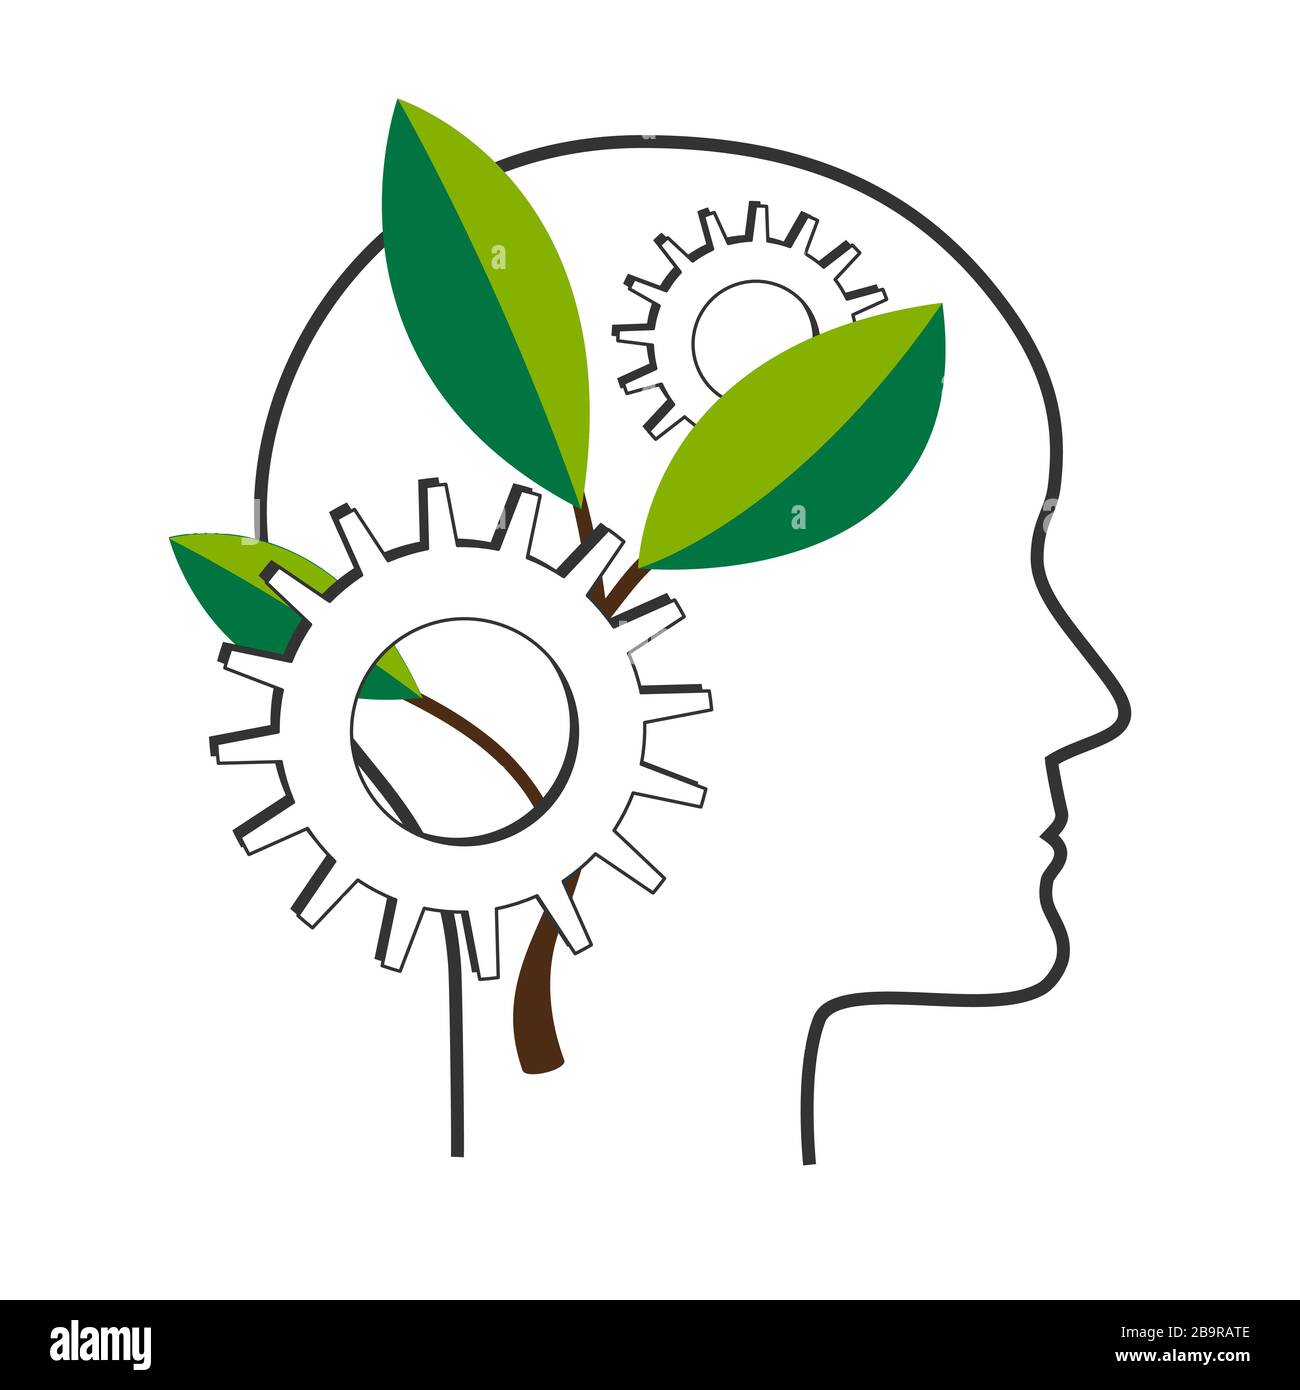 Personal development vector concept. NLP symbol, Natural Language Processing, mental growth idea. Human head with gears and tree Stock Vector